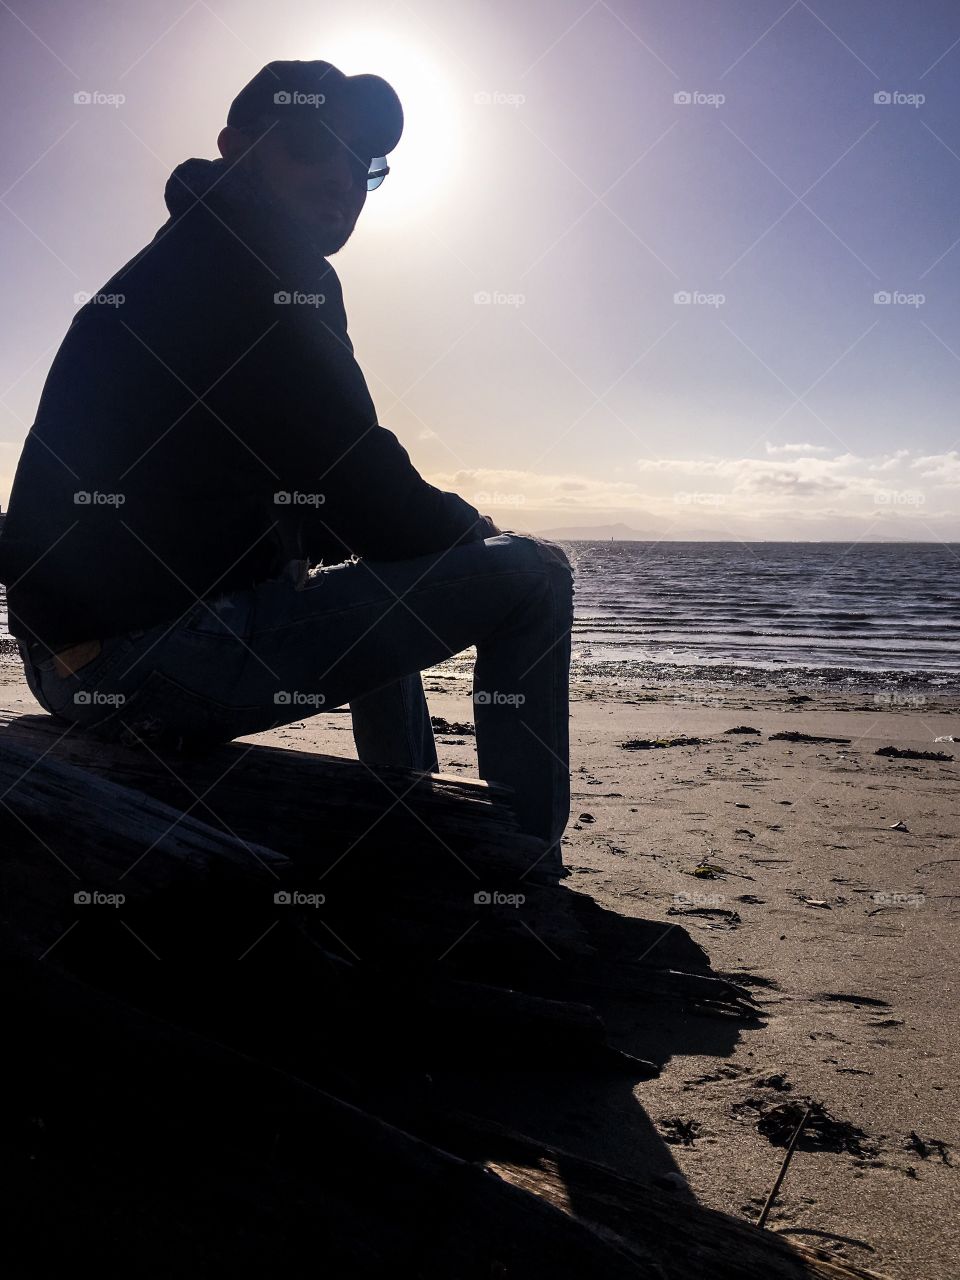 Man sitting on driftwood looking at camera with the sun behind his head.